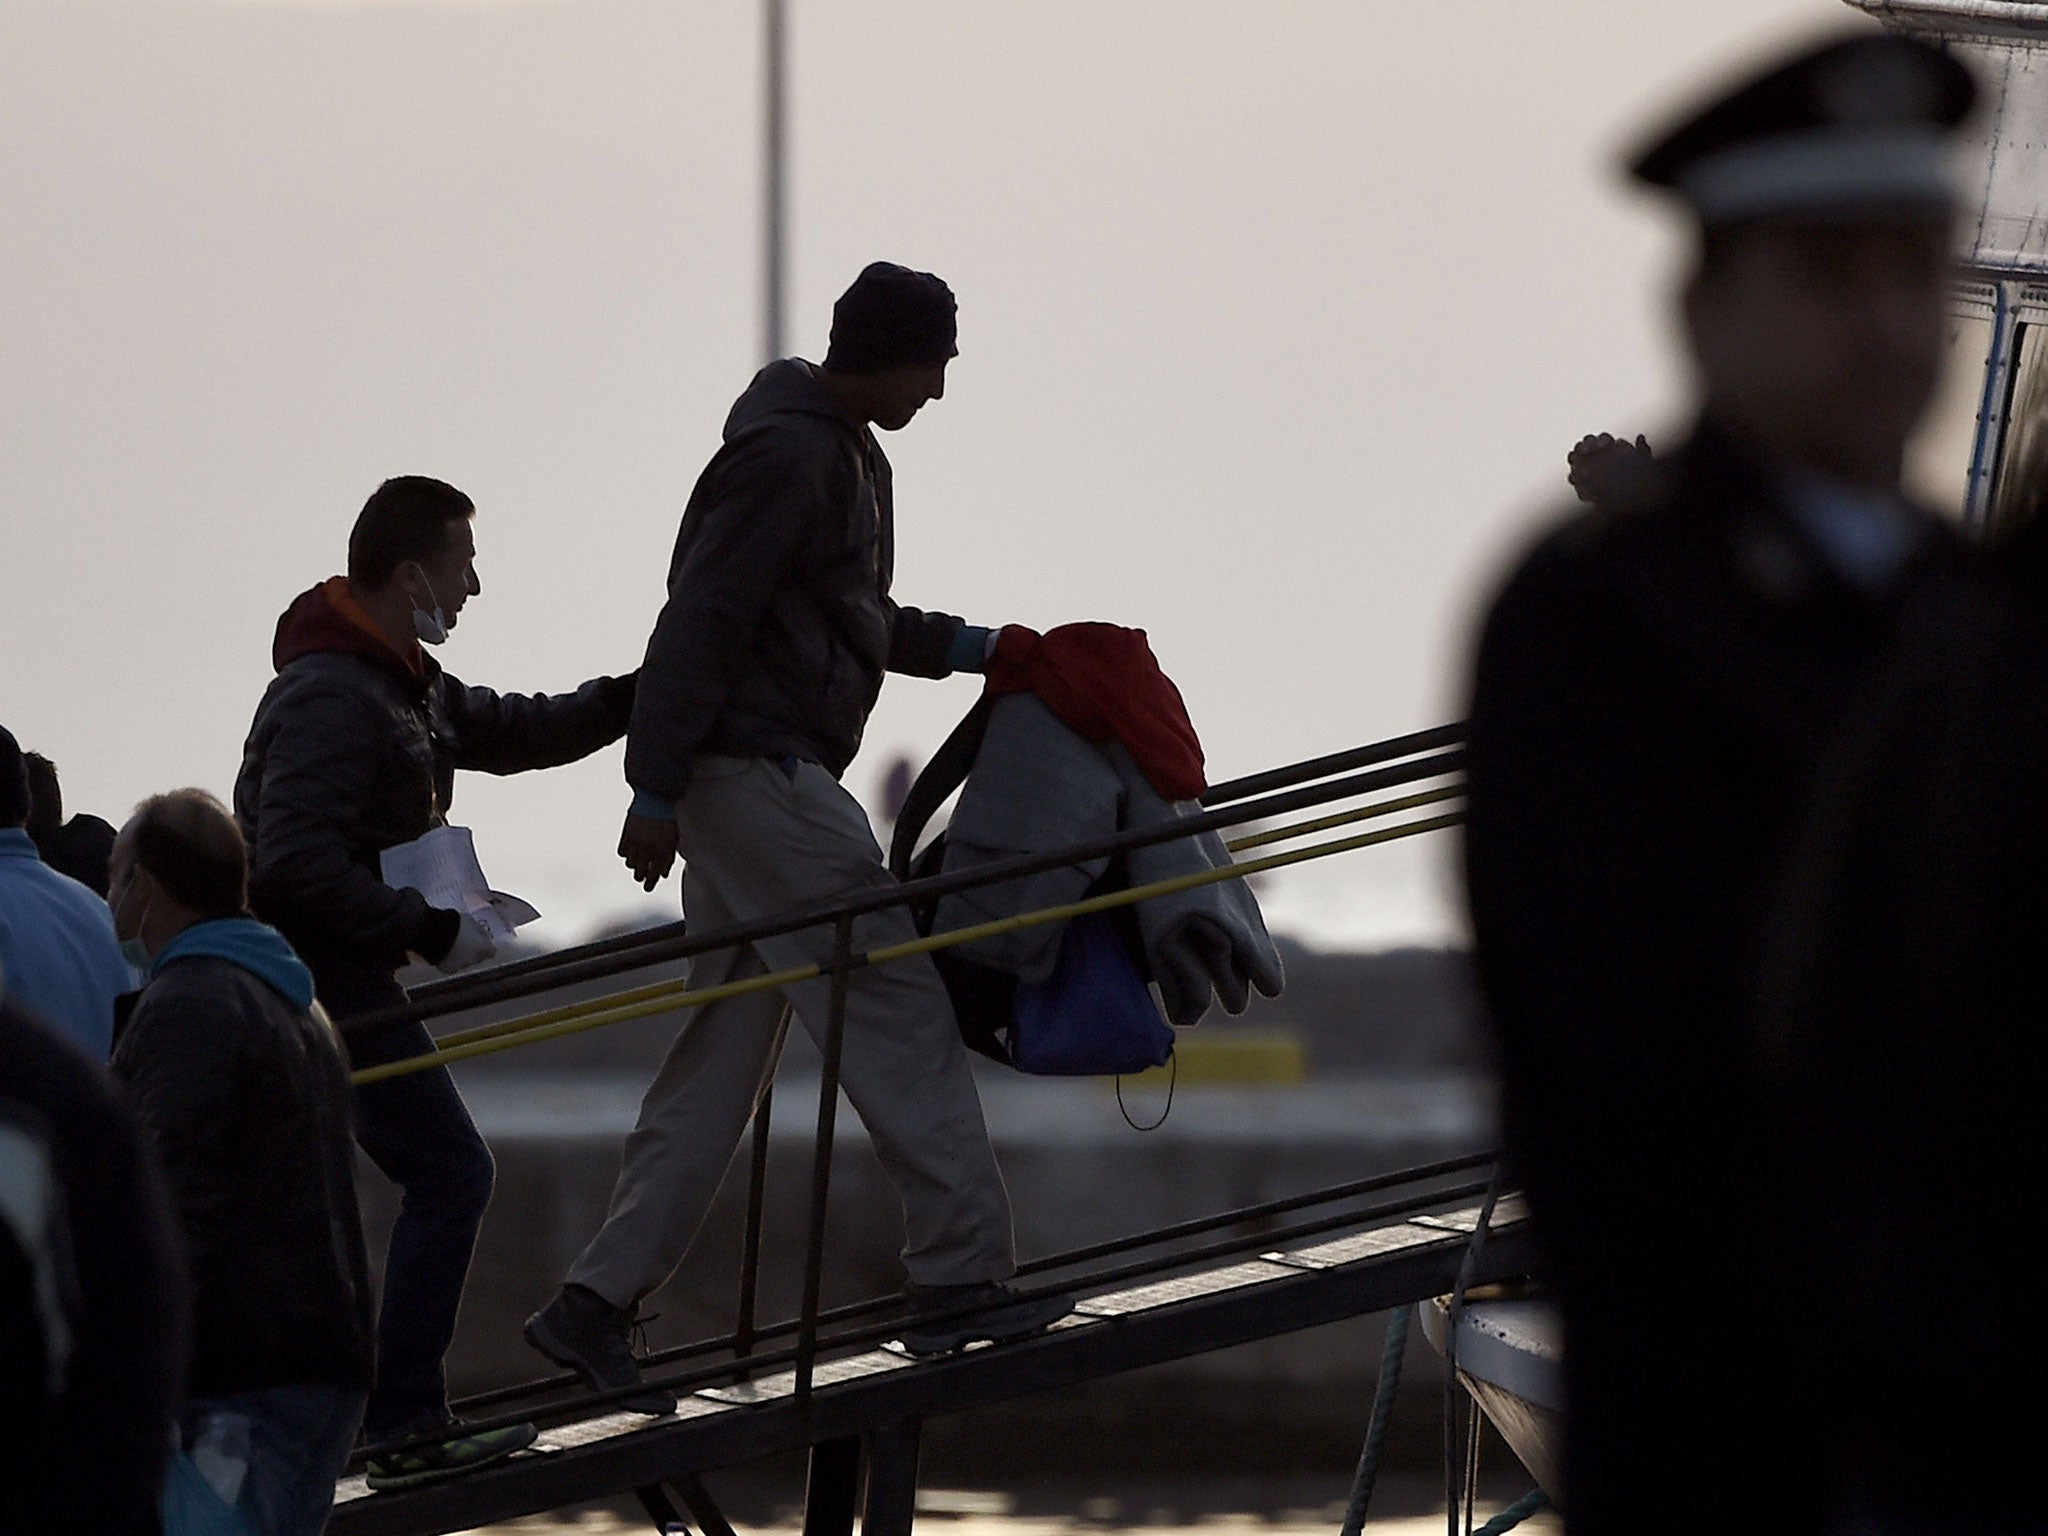 Migrants are deported to Turkey from the port of Mytilene on April 4, 201